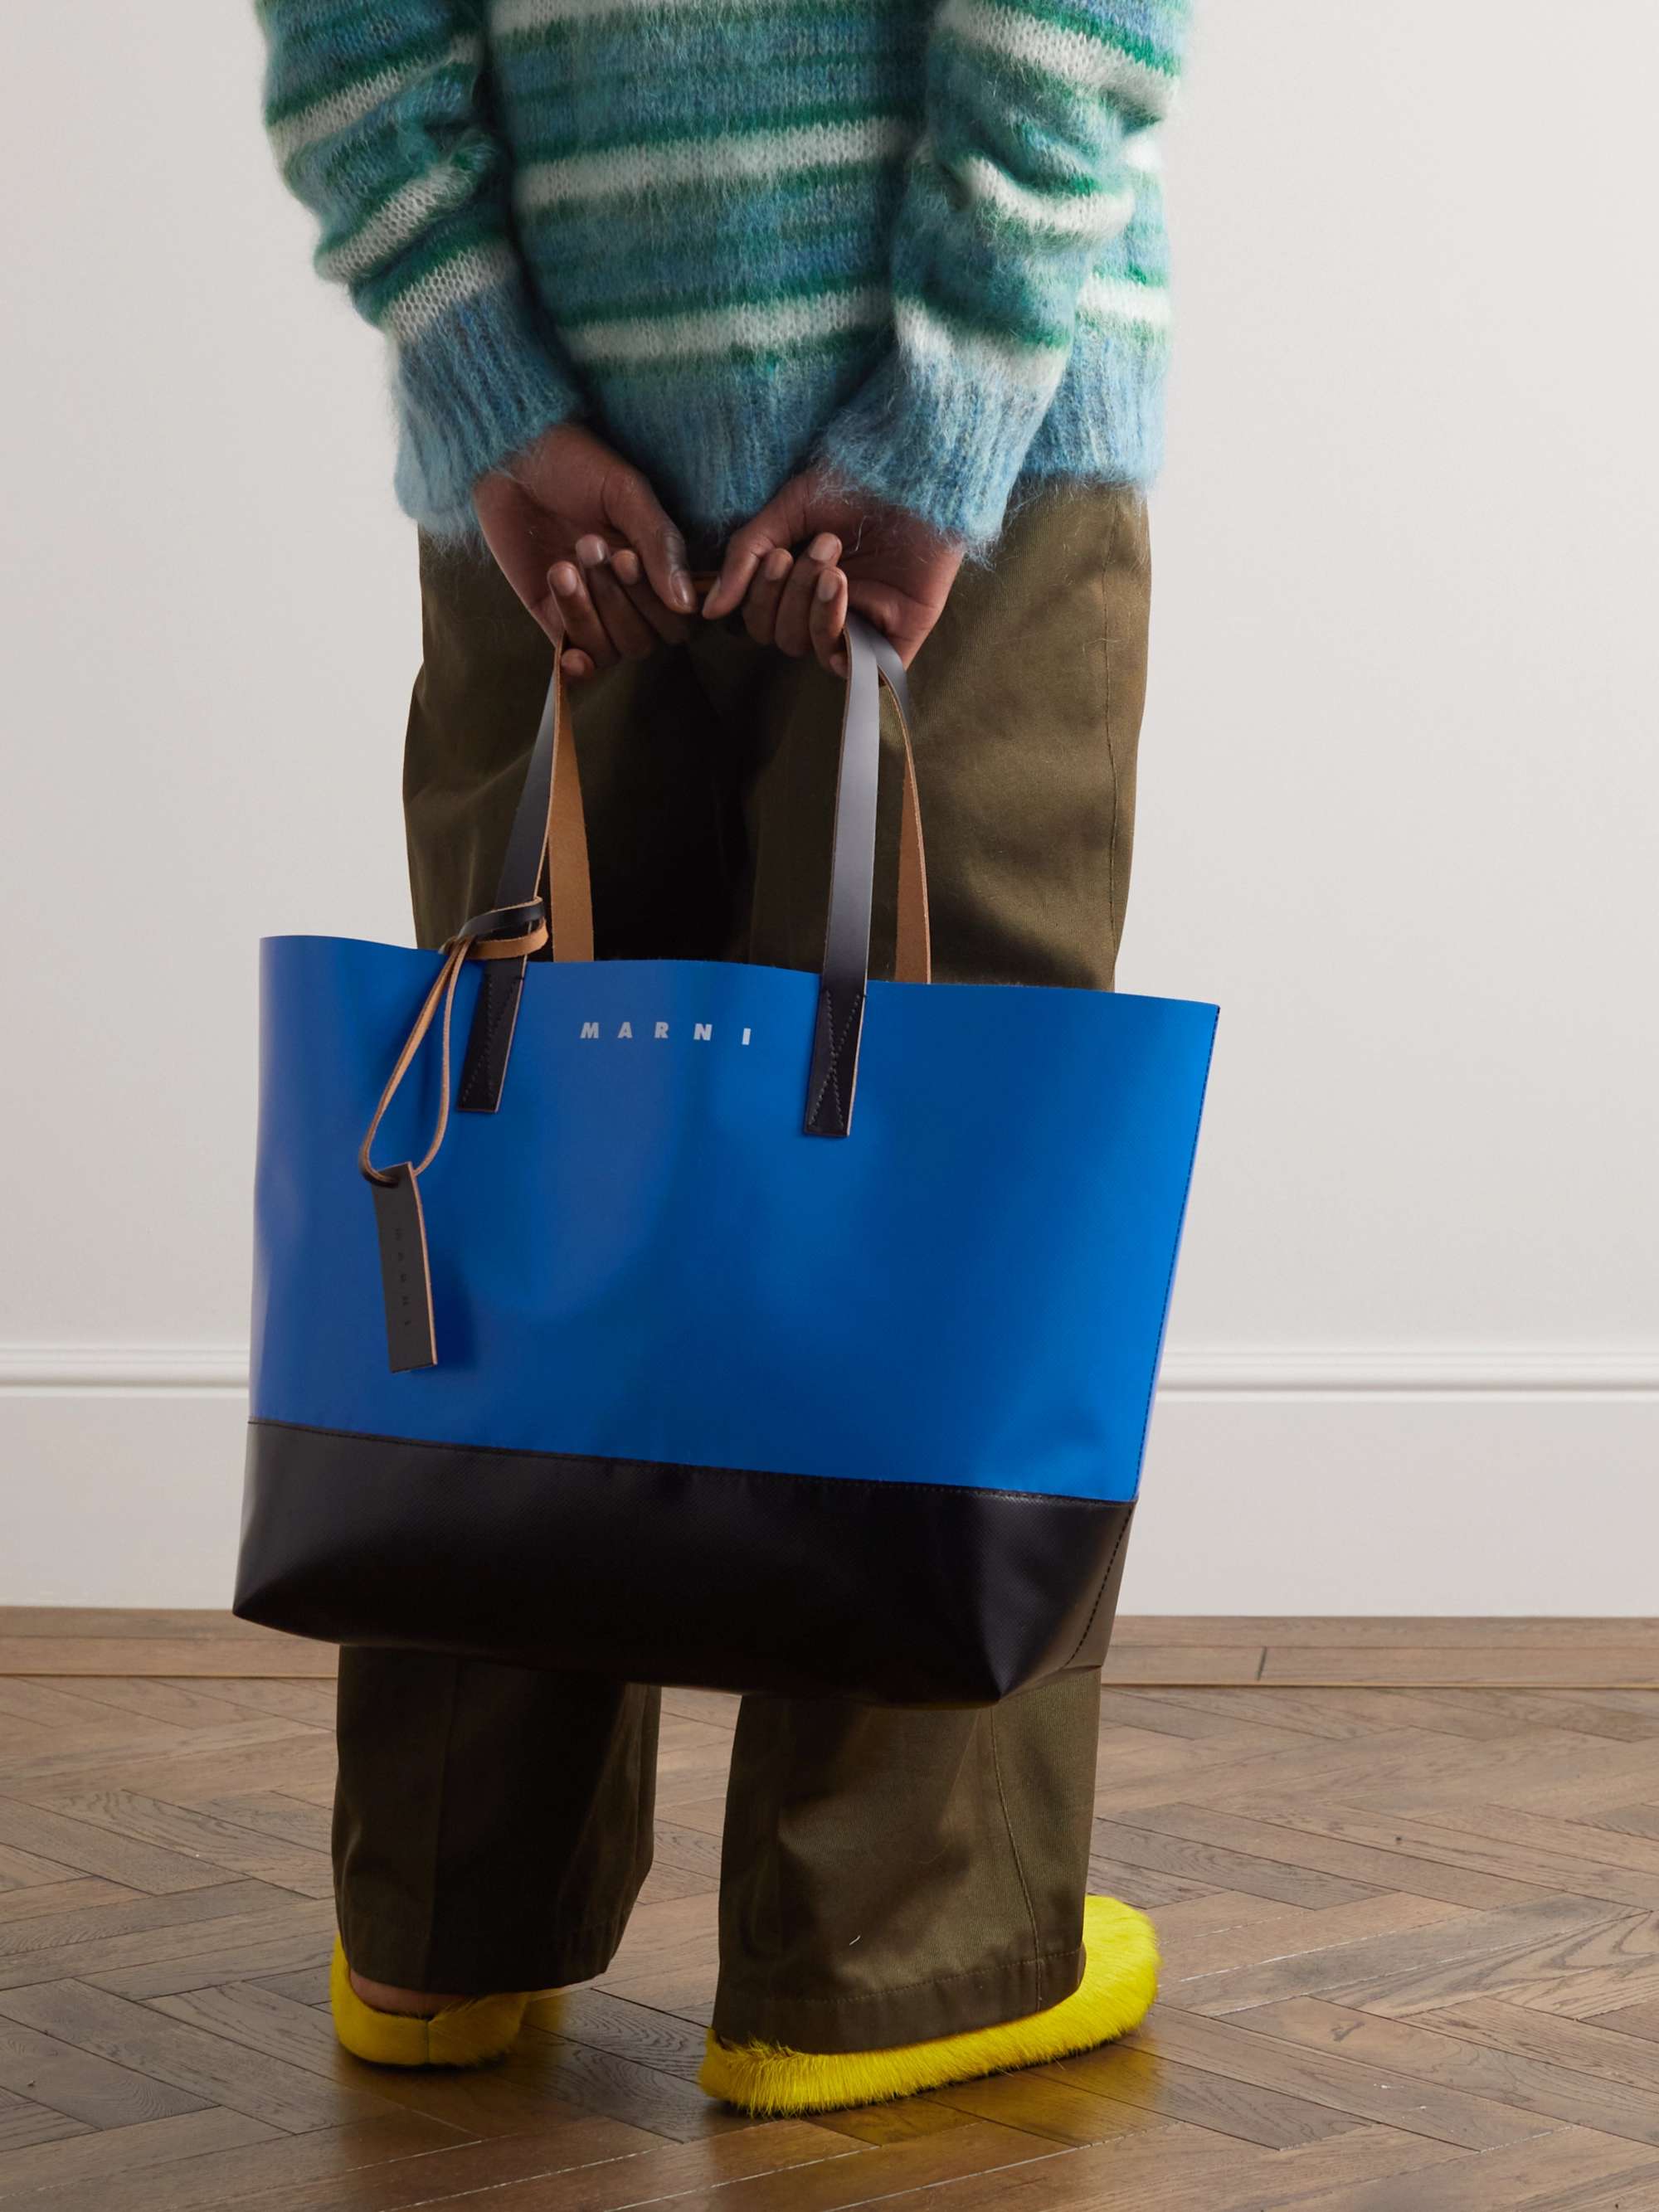 Gift Of The Day: Marni Tote Bag | escapeauthority.com